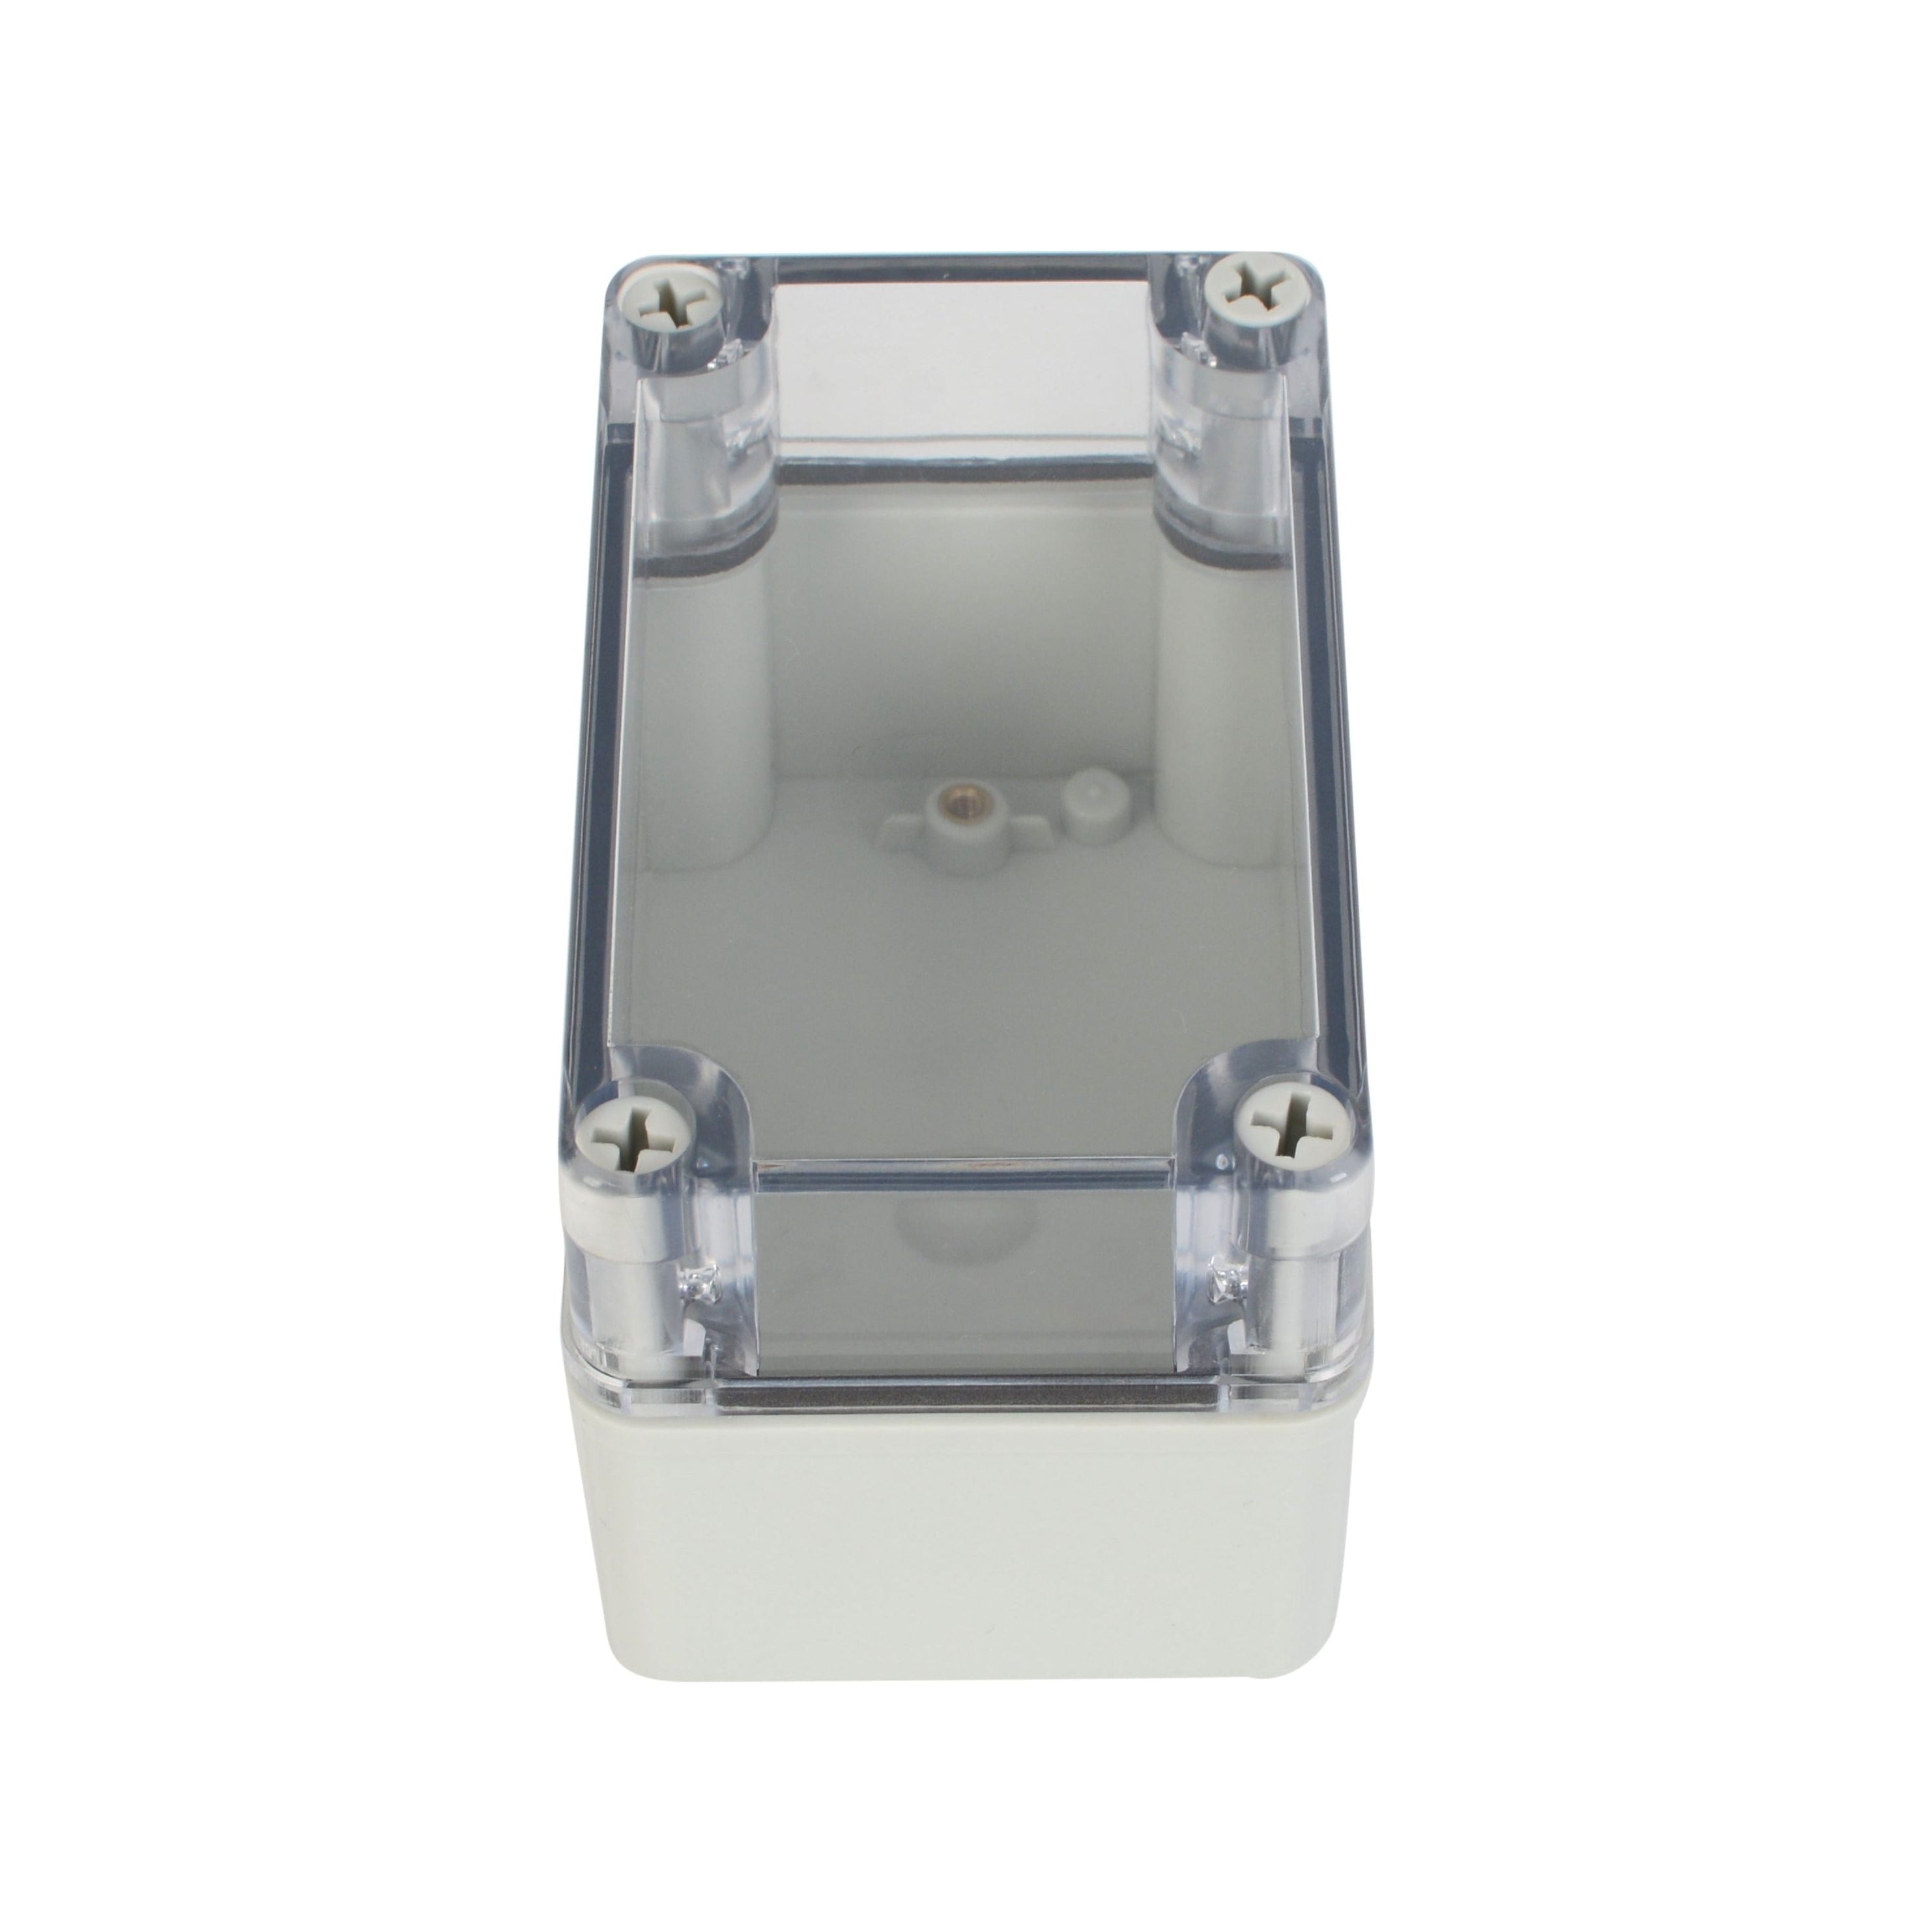 ABS IP66 Clear Lid Junction Box 80 x 130 x 85mm